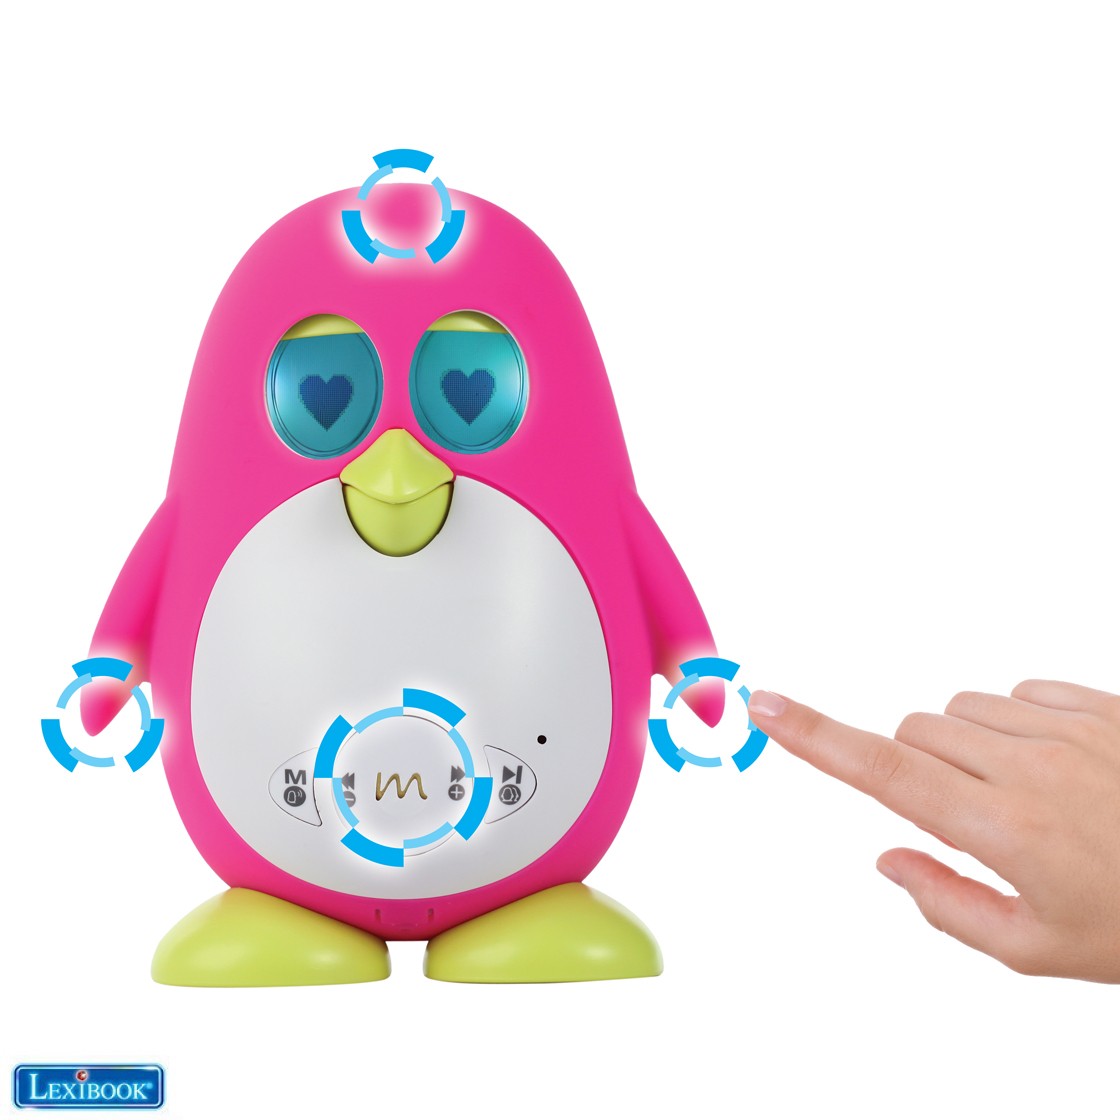 Marbo The Fun Connected Educational Toy Robot